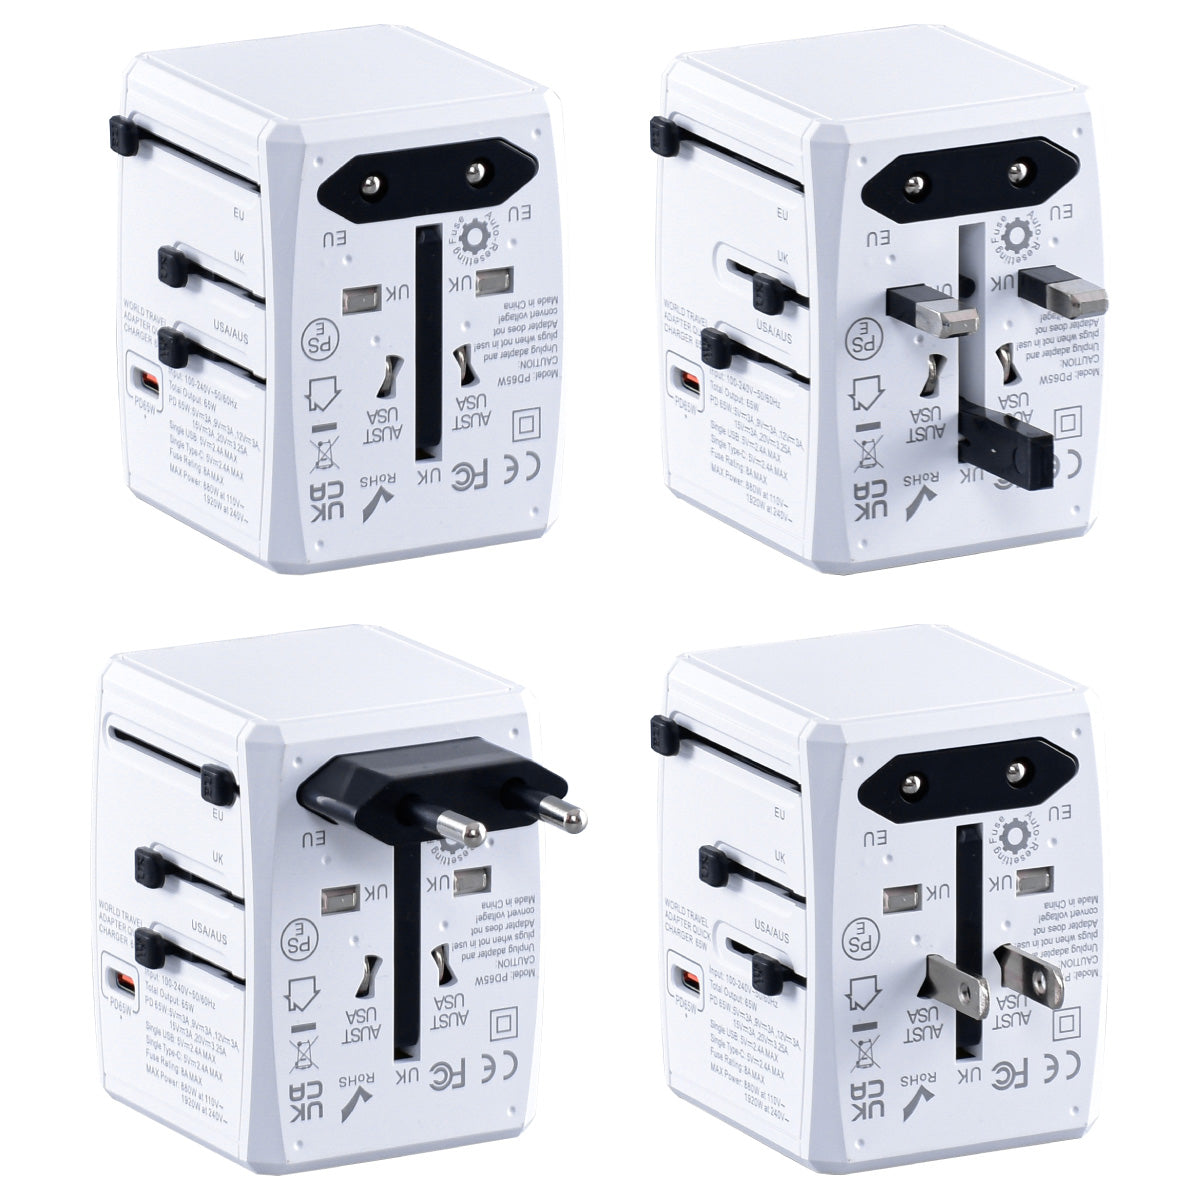 PowerPac Multi Travel Adapter With 2x USB-A + 3x USB-C Charger | PD 65W USB Charger (PP7977)